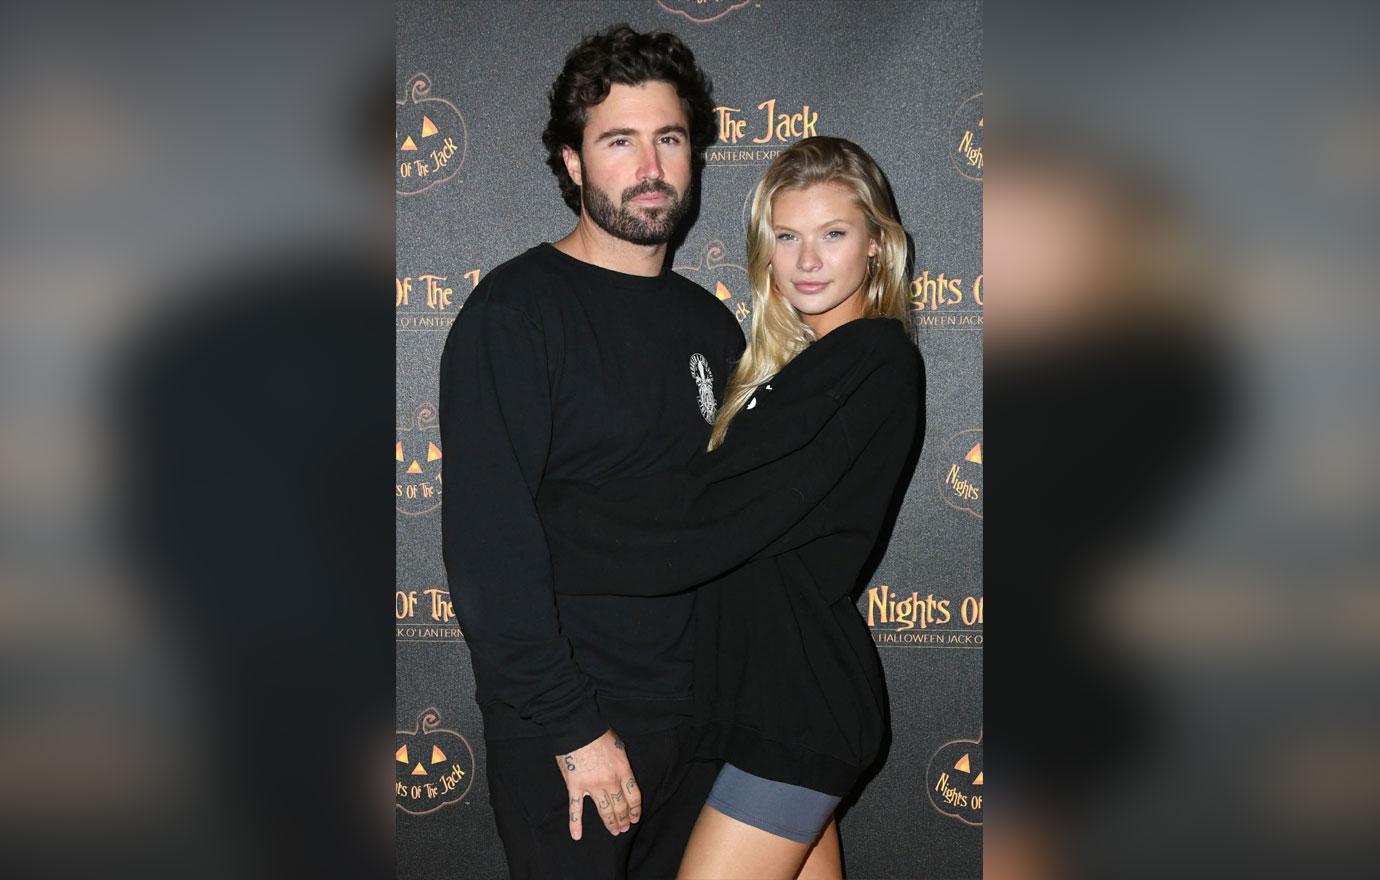 Brody Jenner Girlfriend Josie Canseco's Workout Routine, Diet